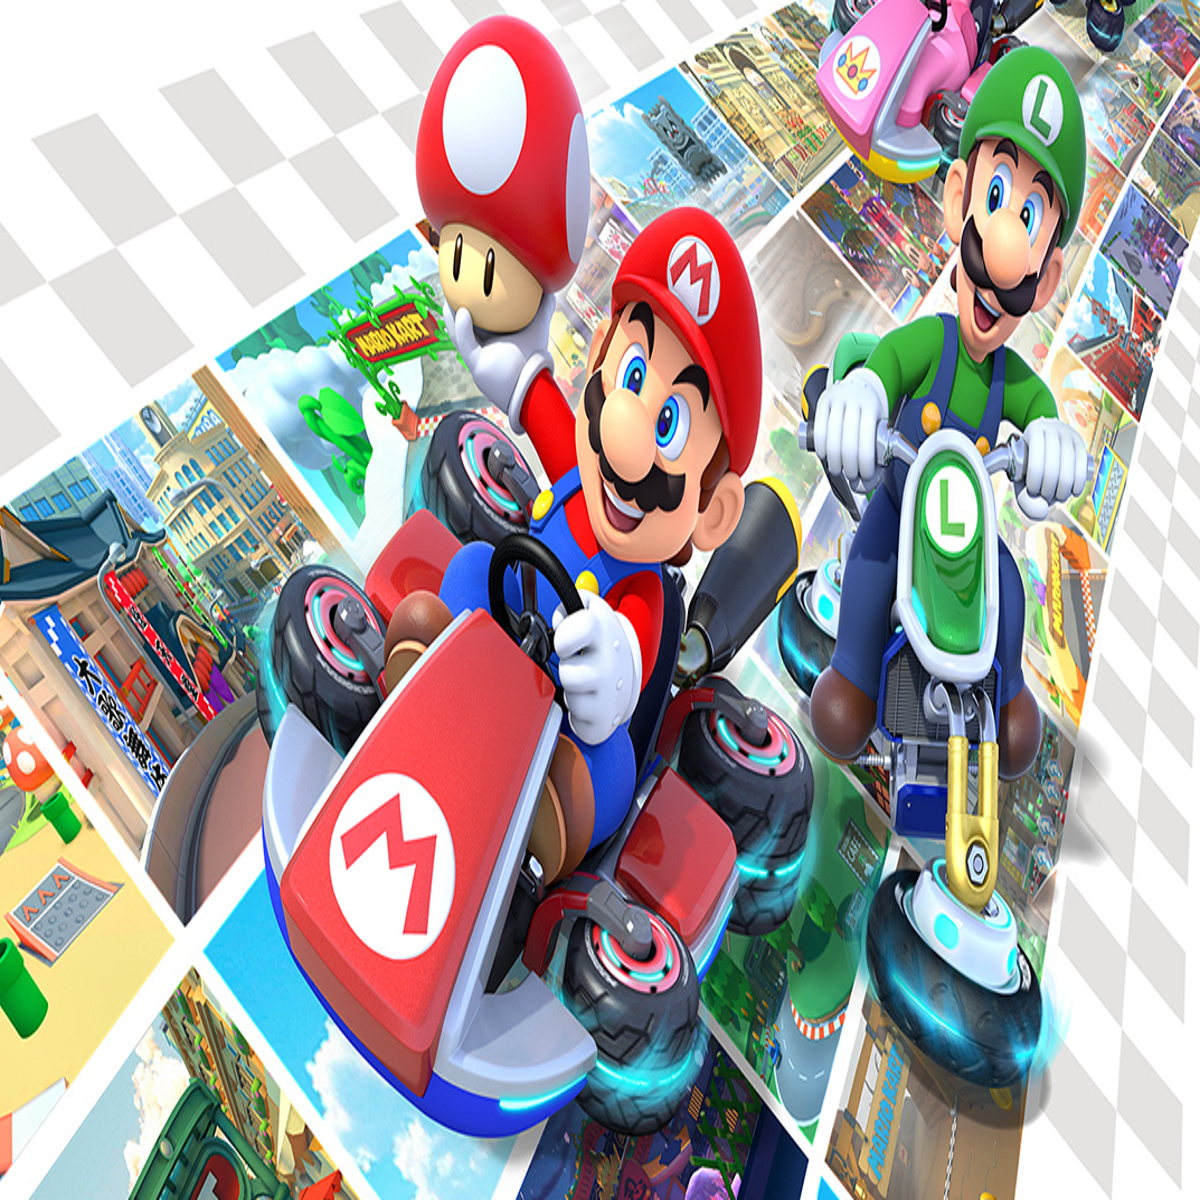 Download Mario Kart 64 APK latest v3.0 for Android